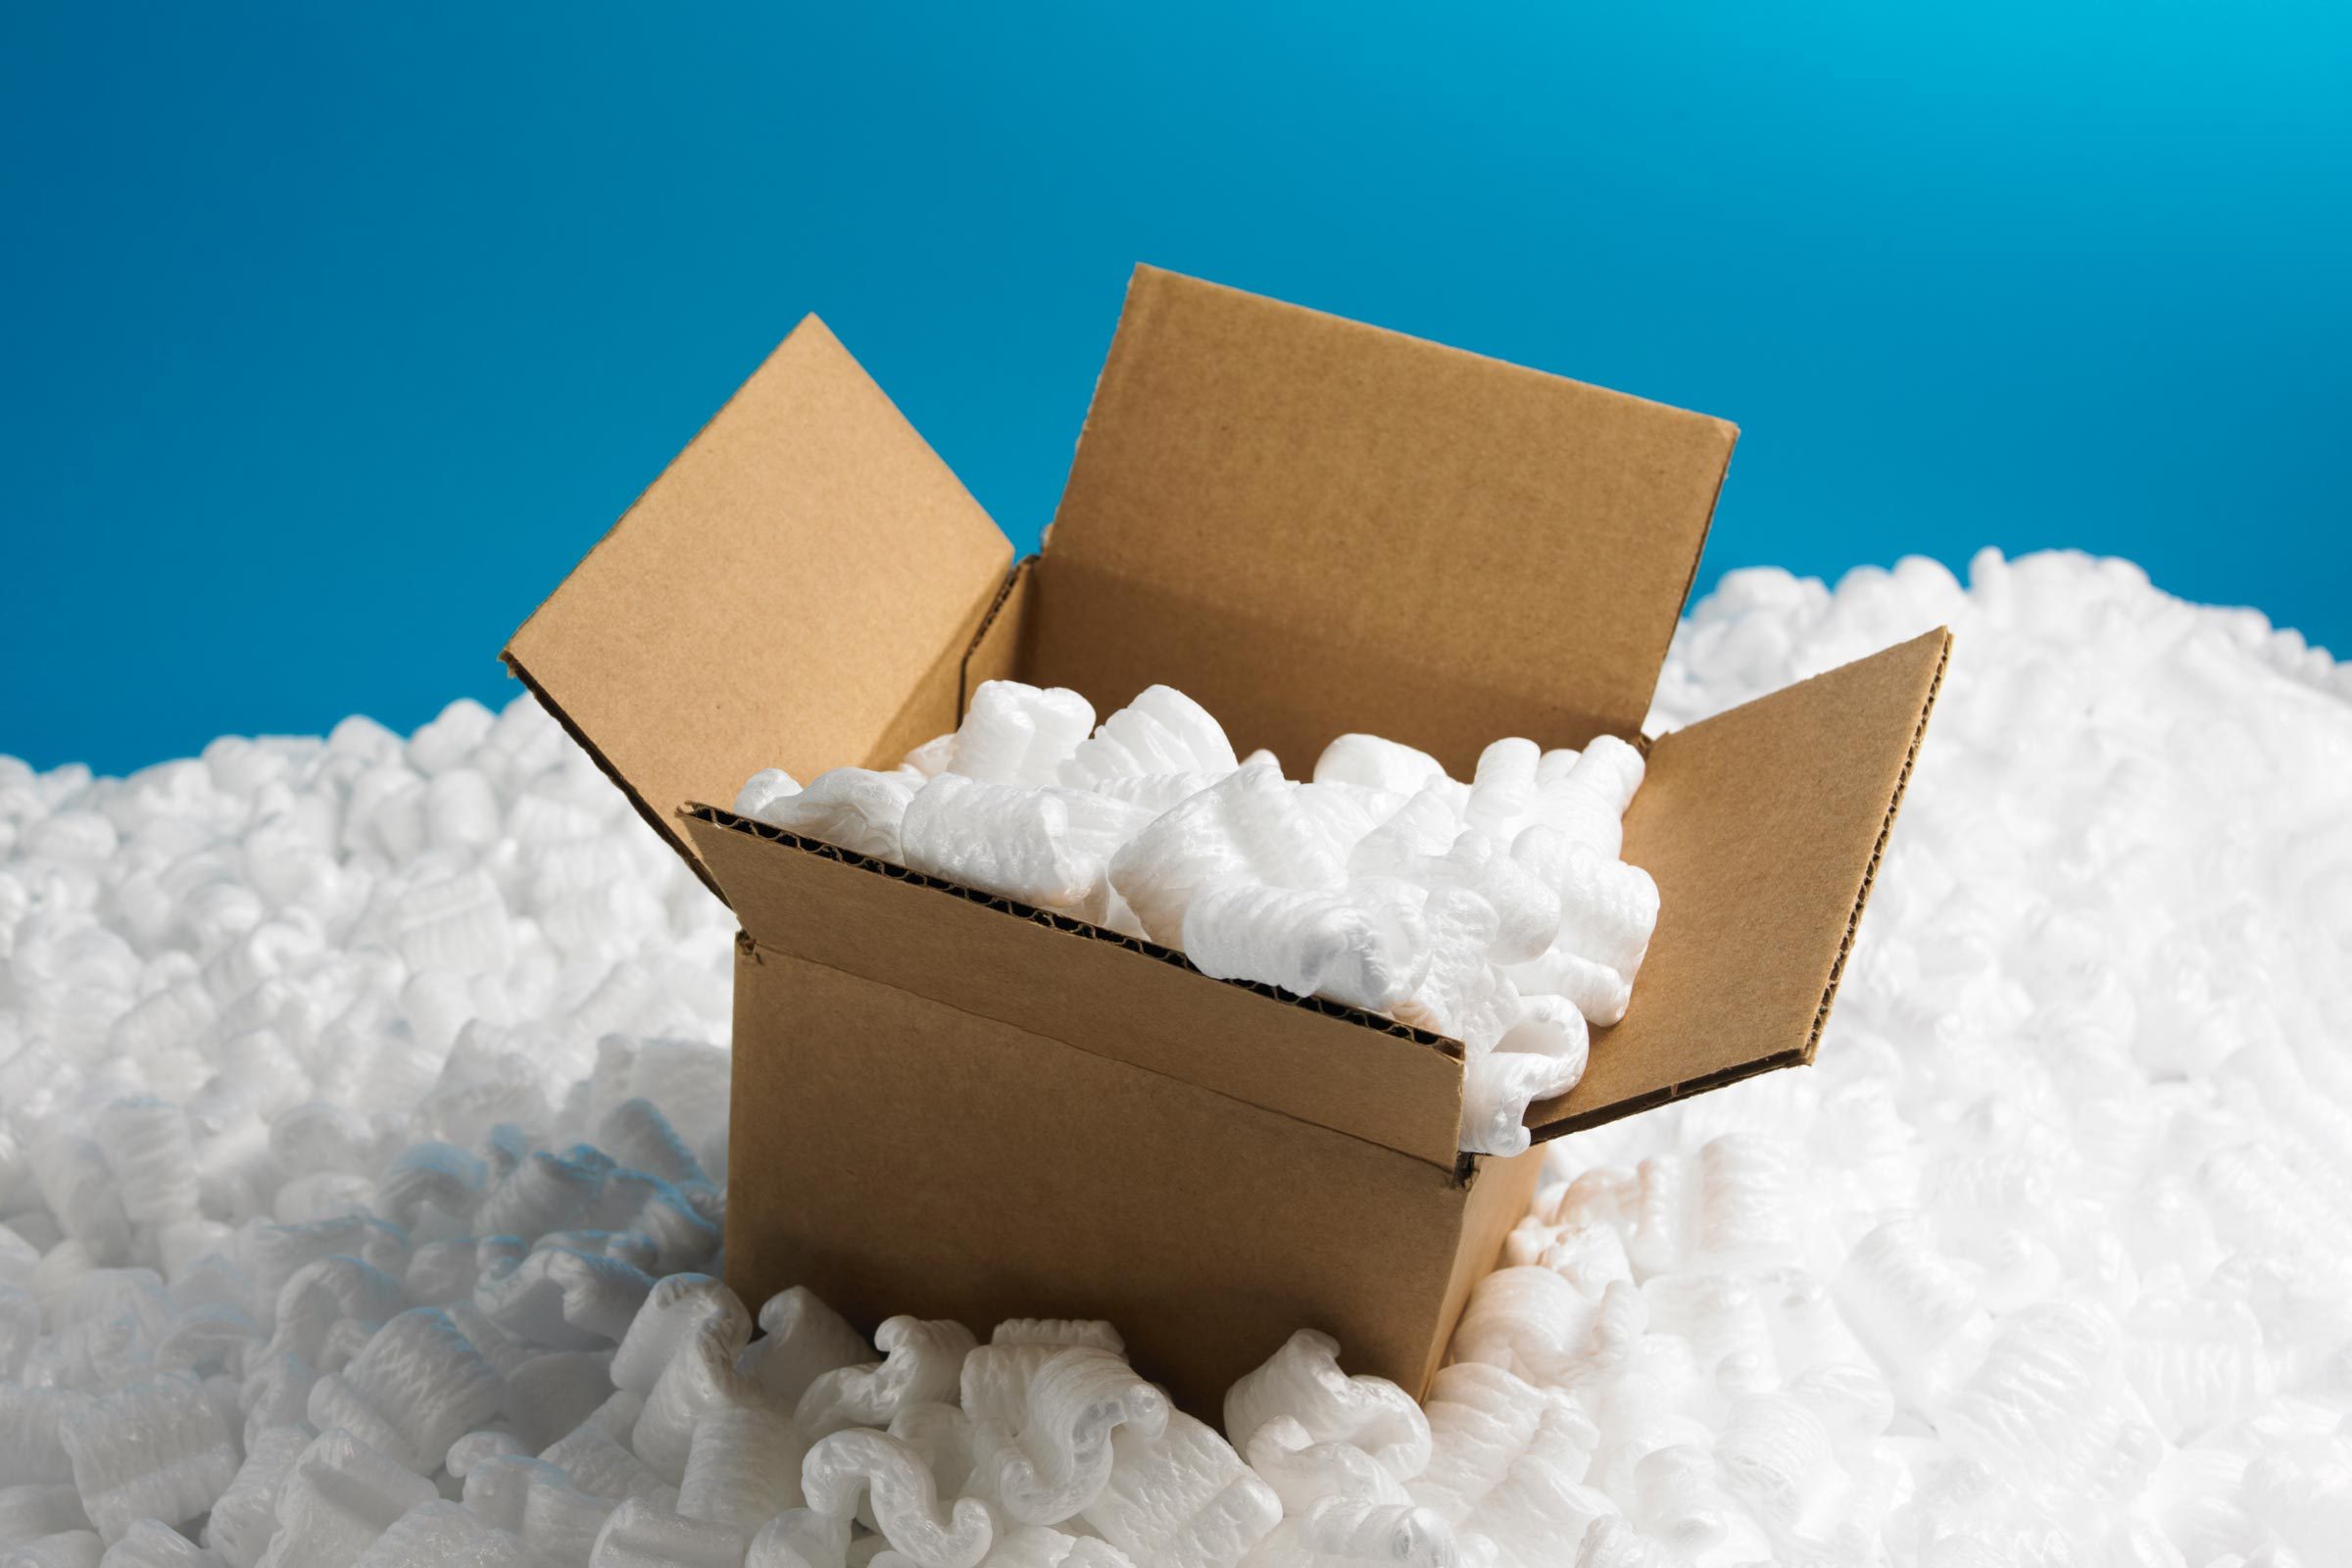 https://www.rd.com/wp-content/uploads/2022/06/cardboard-box-packing-peanuts-GettyImages-177495280-MLedit.jpg